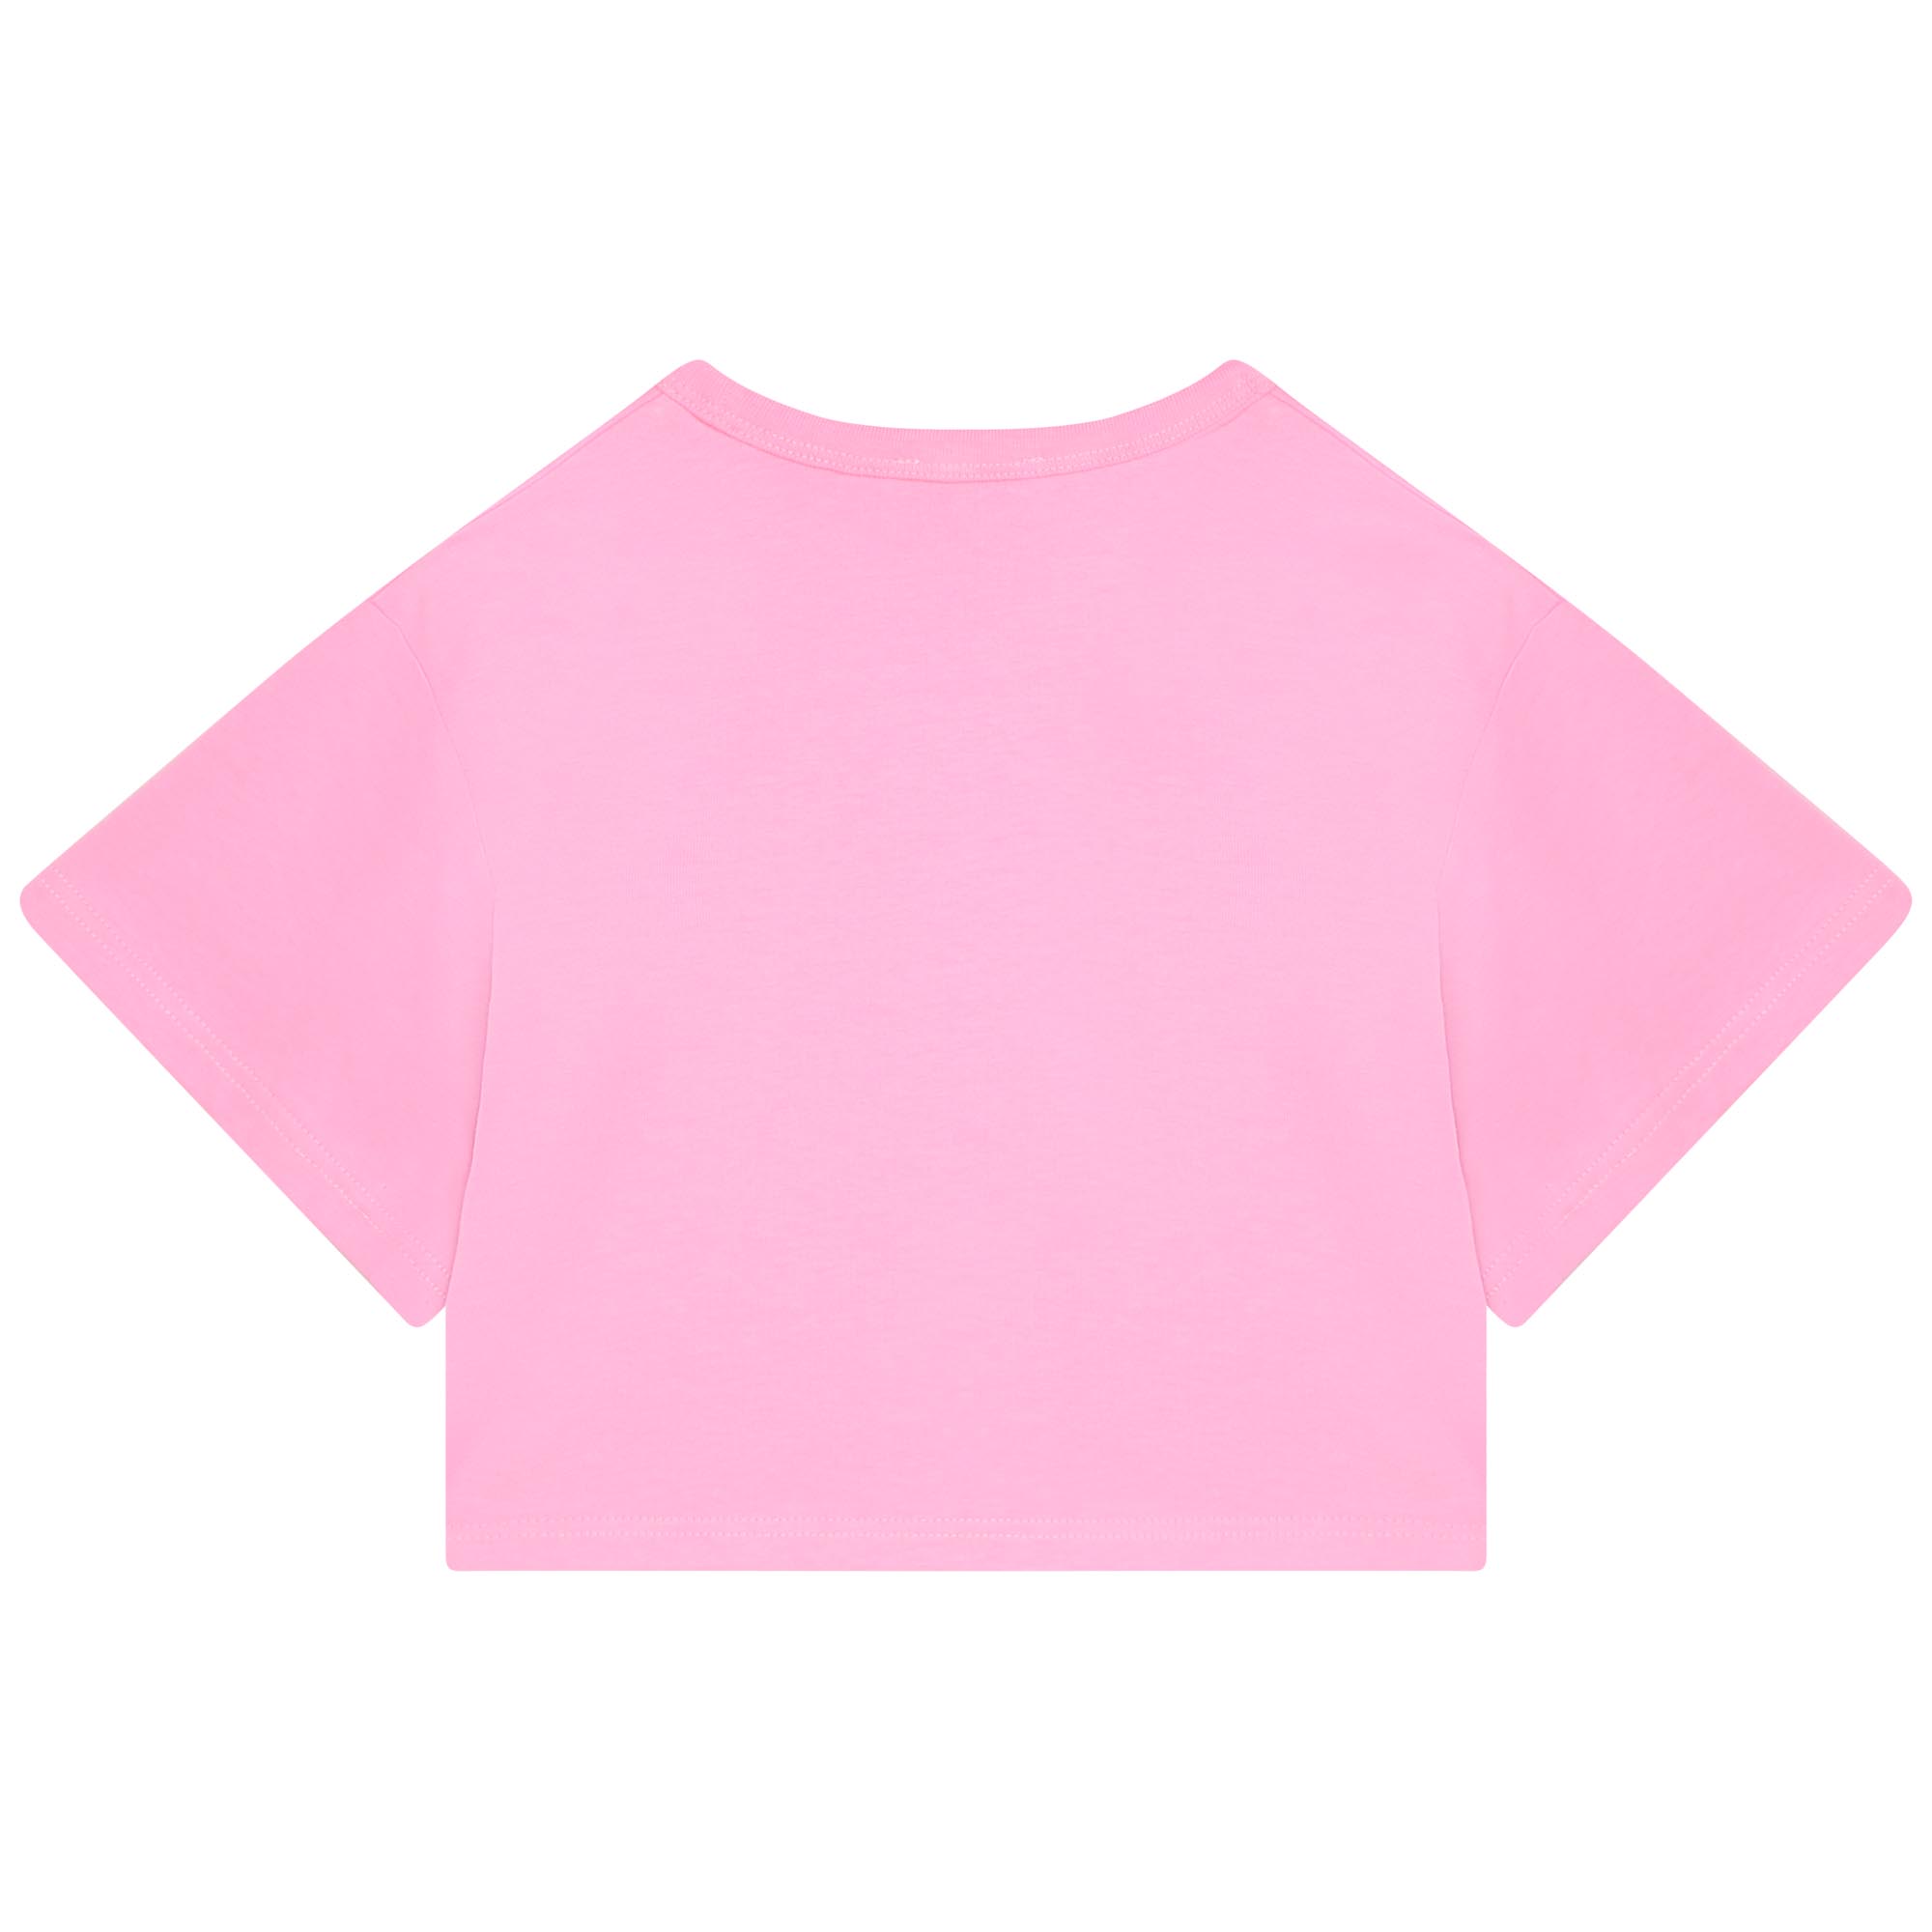 T-shirt stampata in cotone MARC JACOBS Per BAMBINA